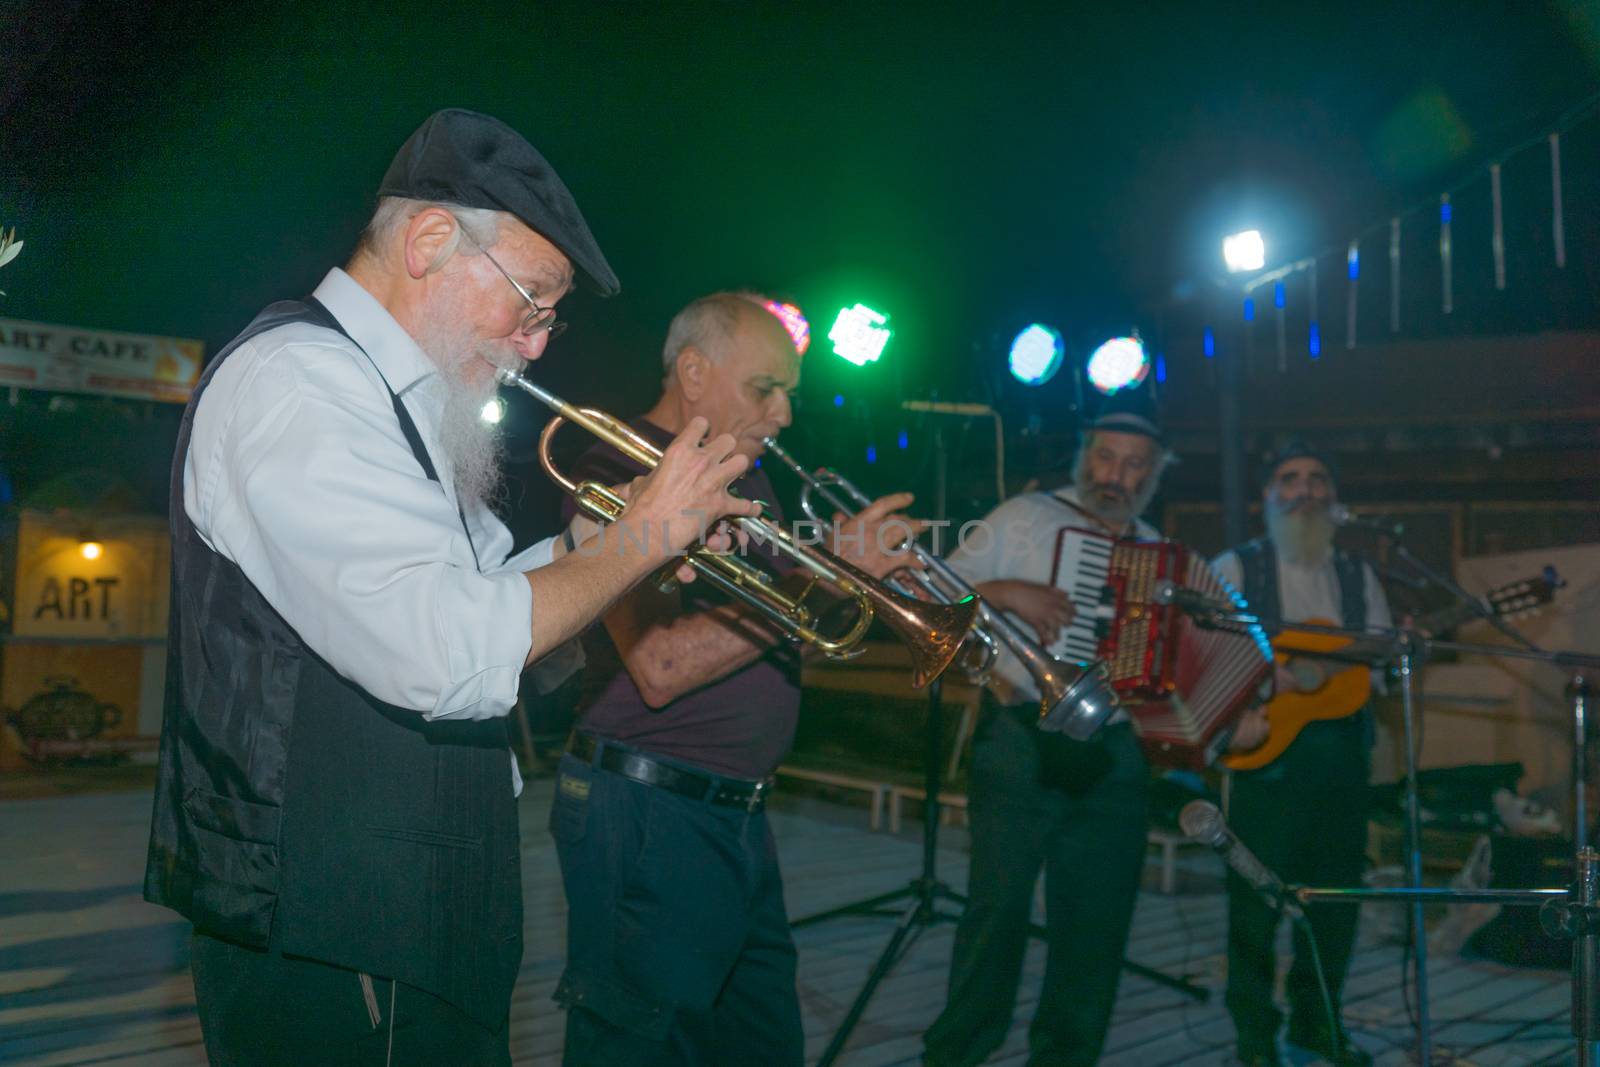 Safed, Israel - August 14, 2018: Scene of the Klezmer Festival, with street musicians playing, in Safed (Tzfat), Israel. Its the 31st annual traditional Jewish festival in the public streets of Safed